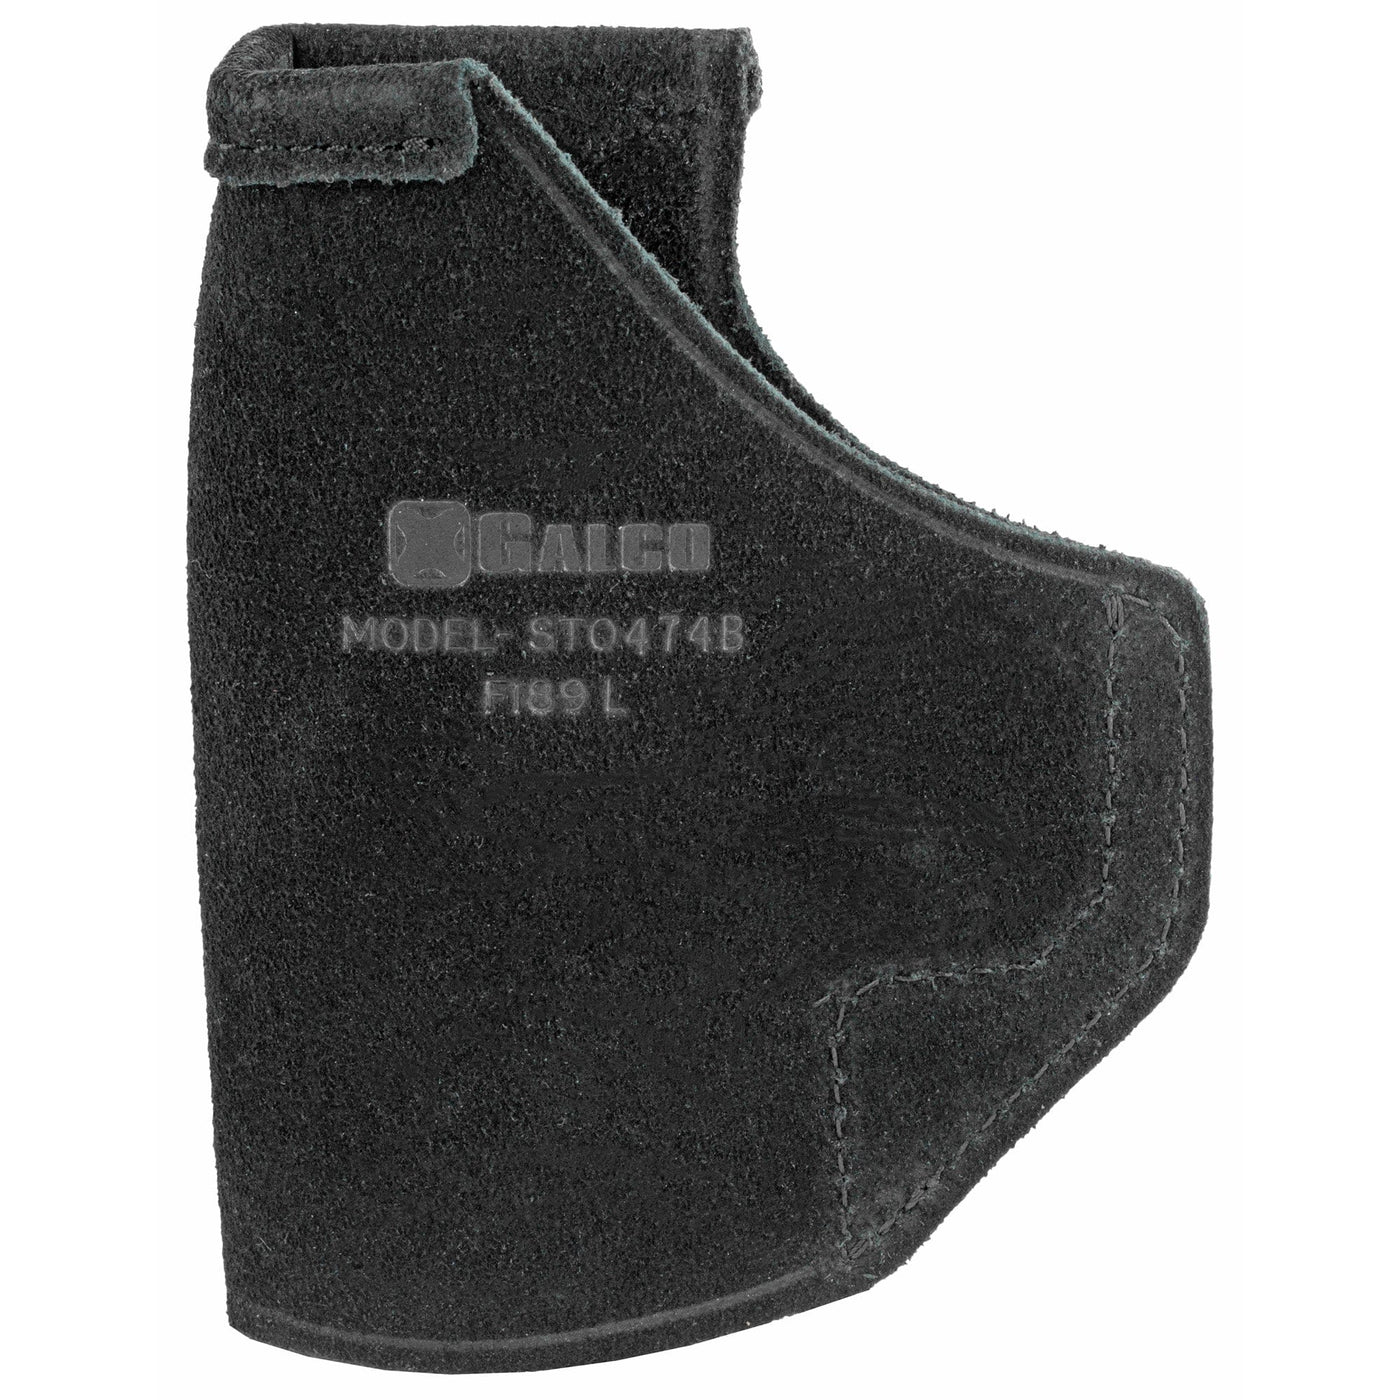 Galco Galco Stow-n-go Sw M&p Com Rh Blk Holsters